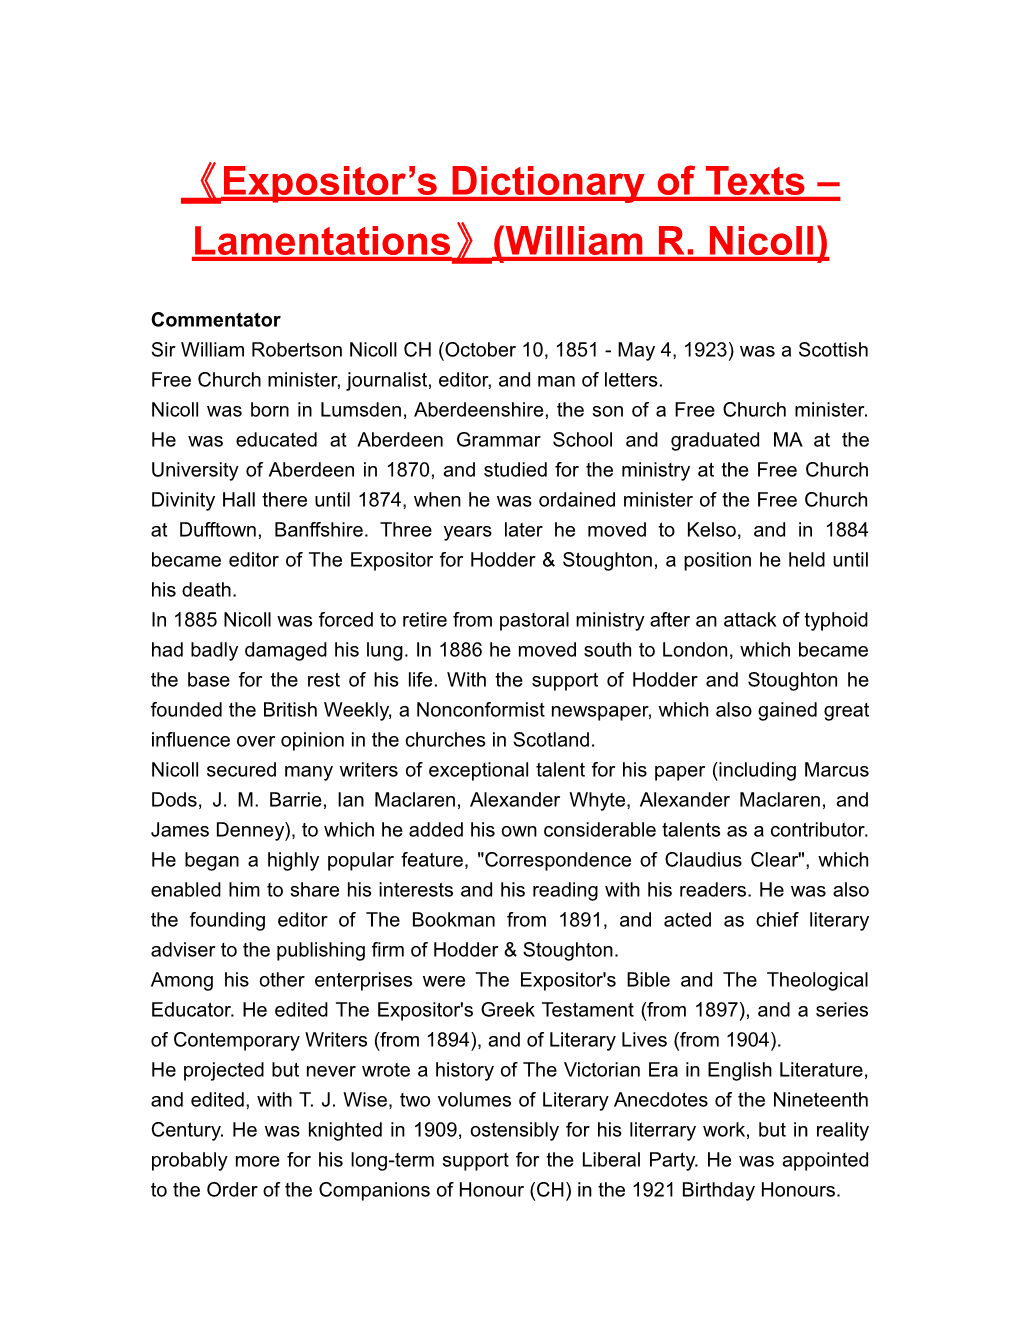 Expositor S Dictionary of Texts Lamentations (William R. Nicoll)